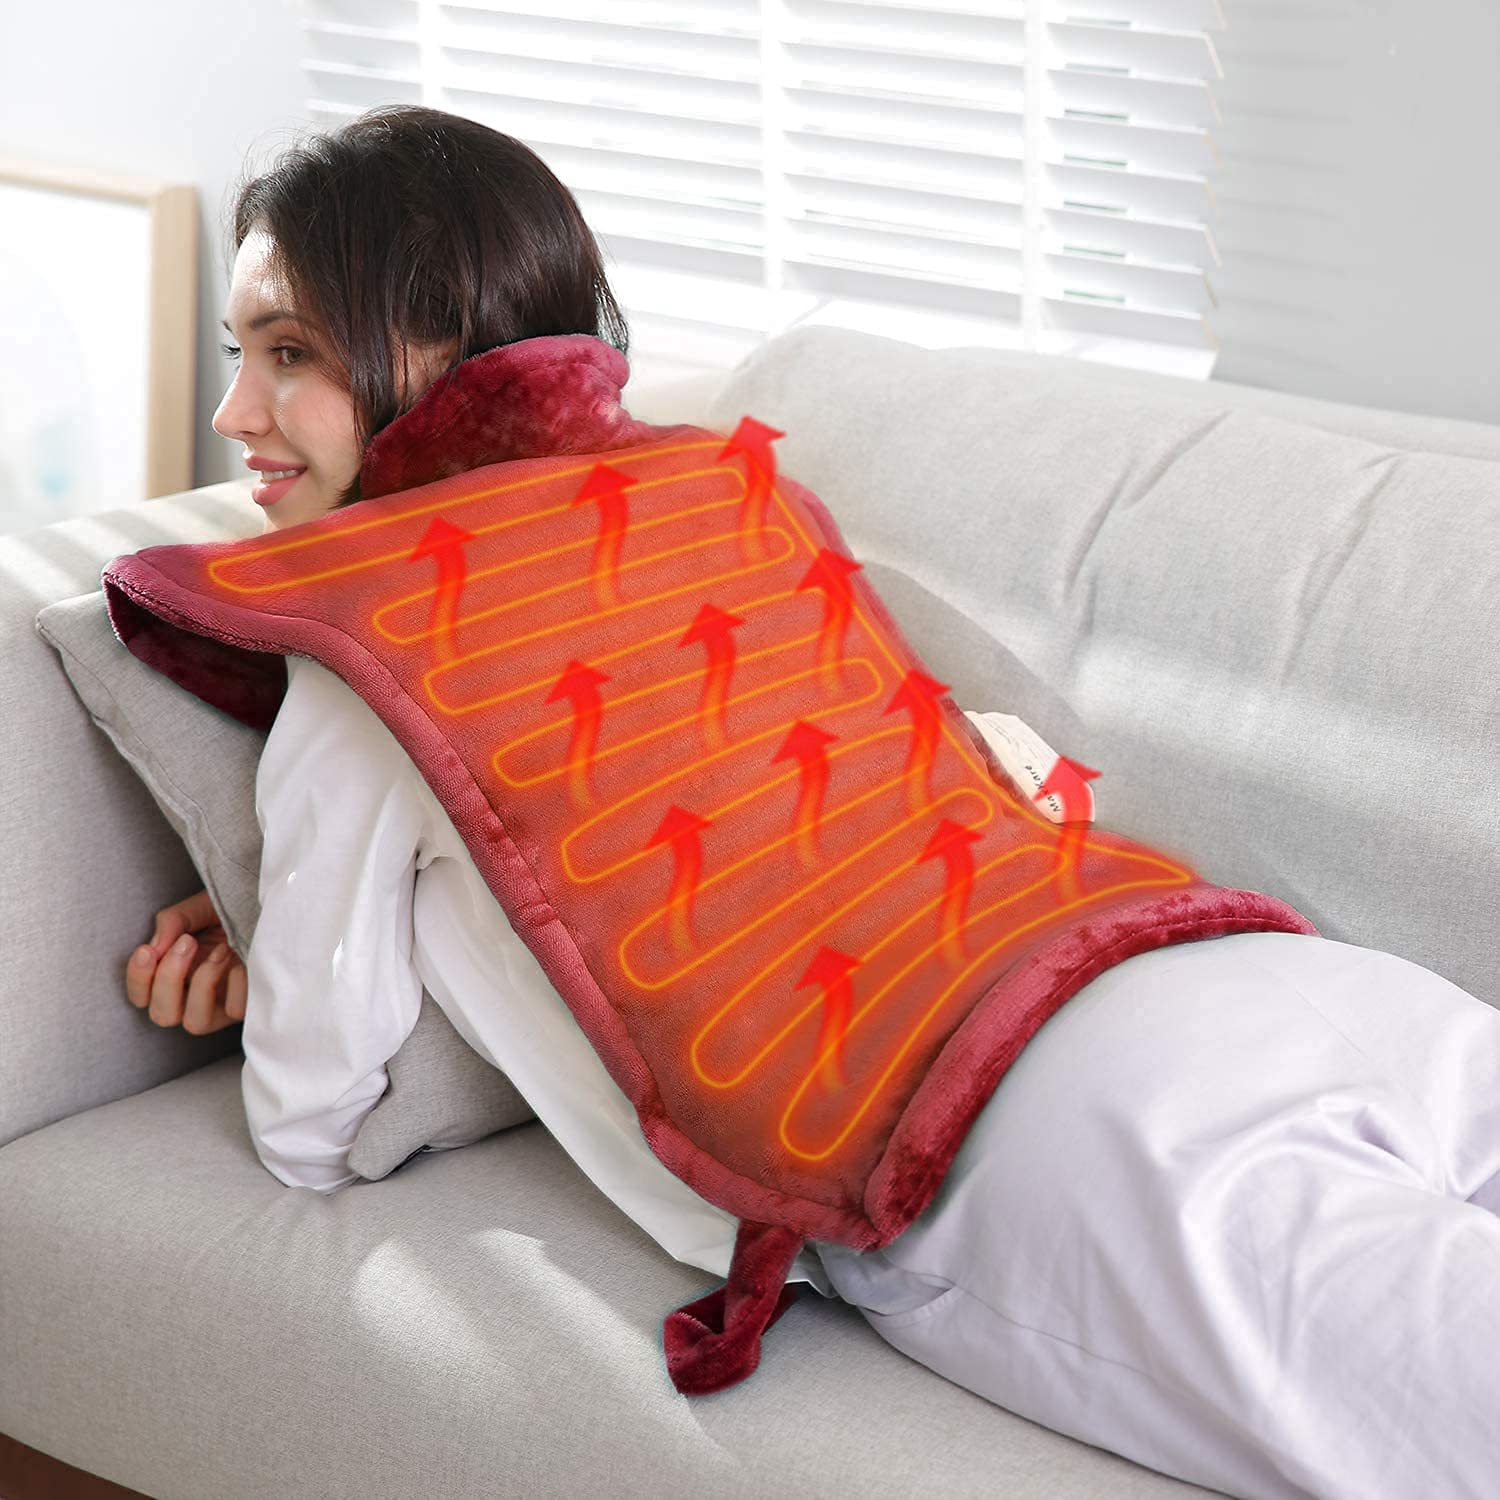 The Massaging Heated Neck and Shoulder Wrap